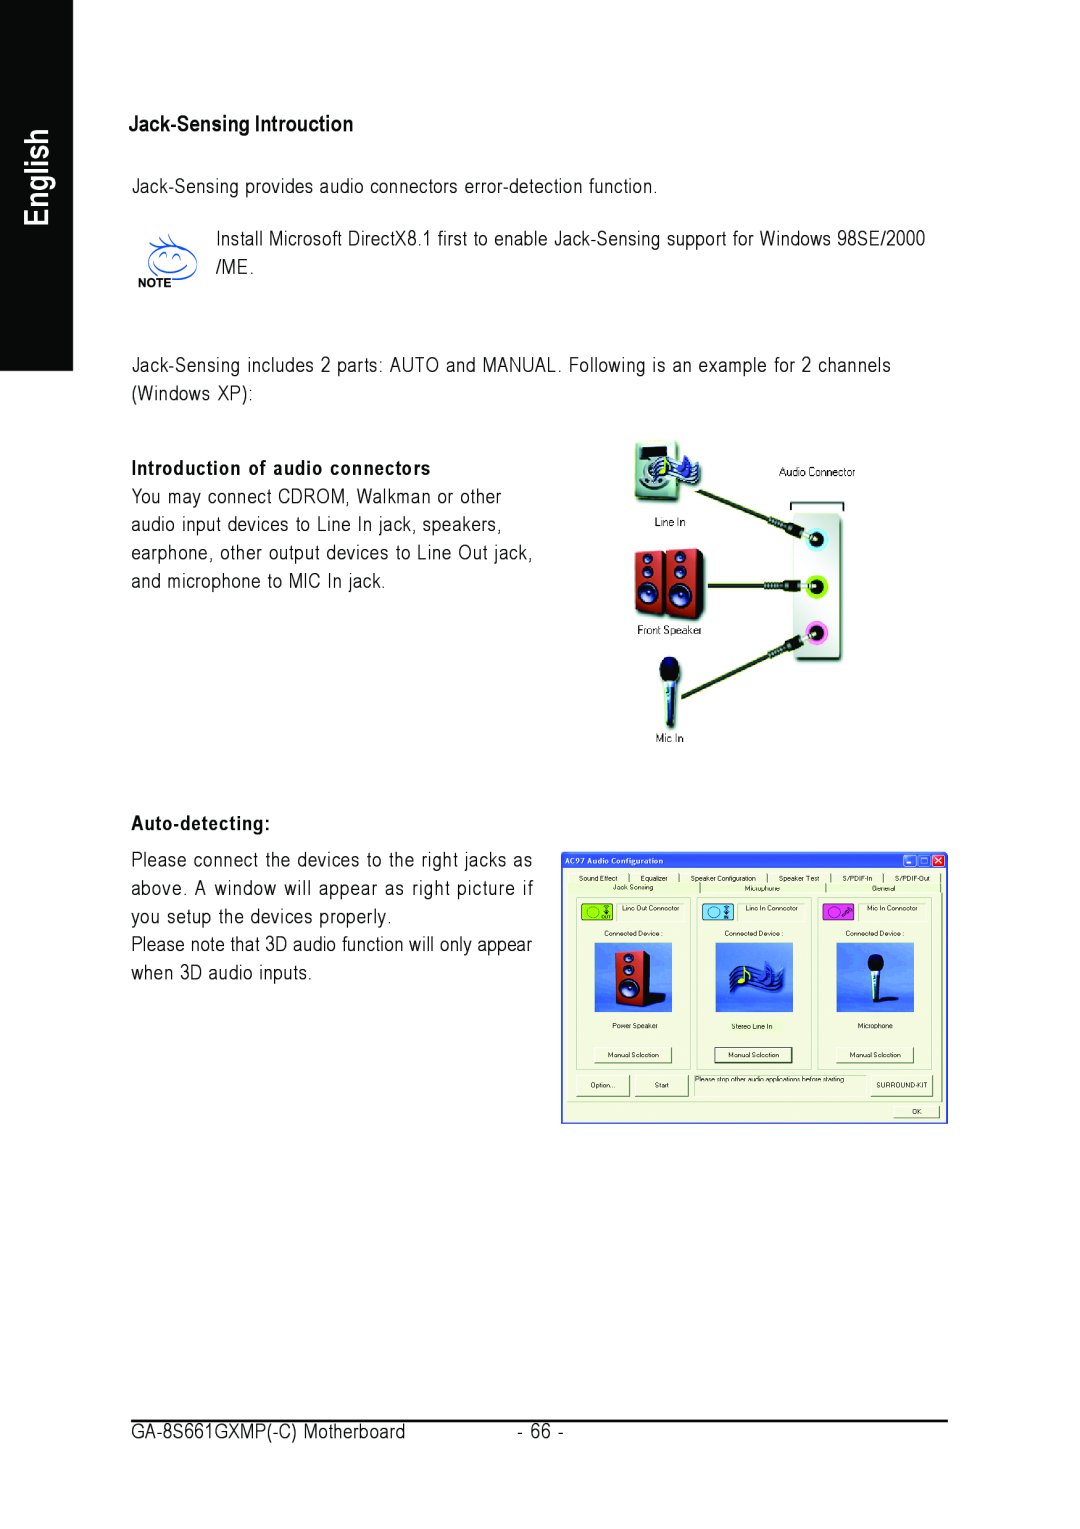 Gigabyte GA-8S661GXMP user manual Jack-Sensing Introuction, English, Introduction of audio connectors, Auto-detecting 